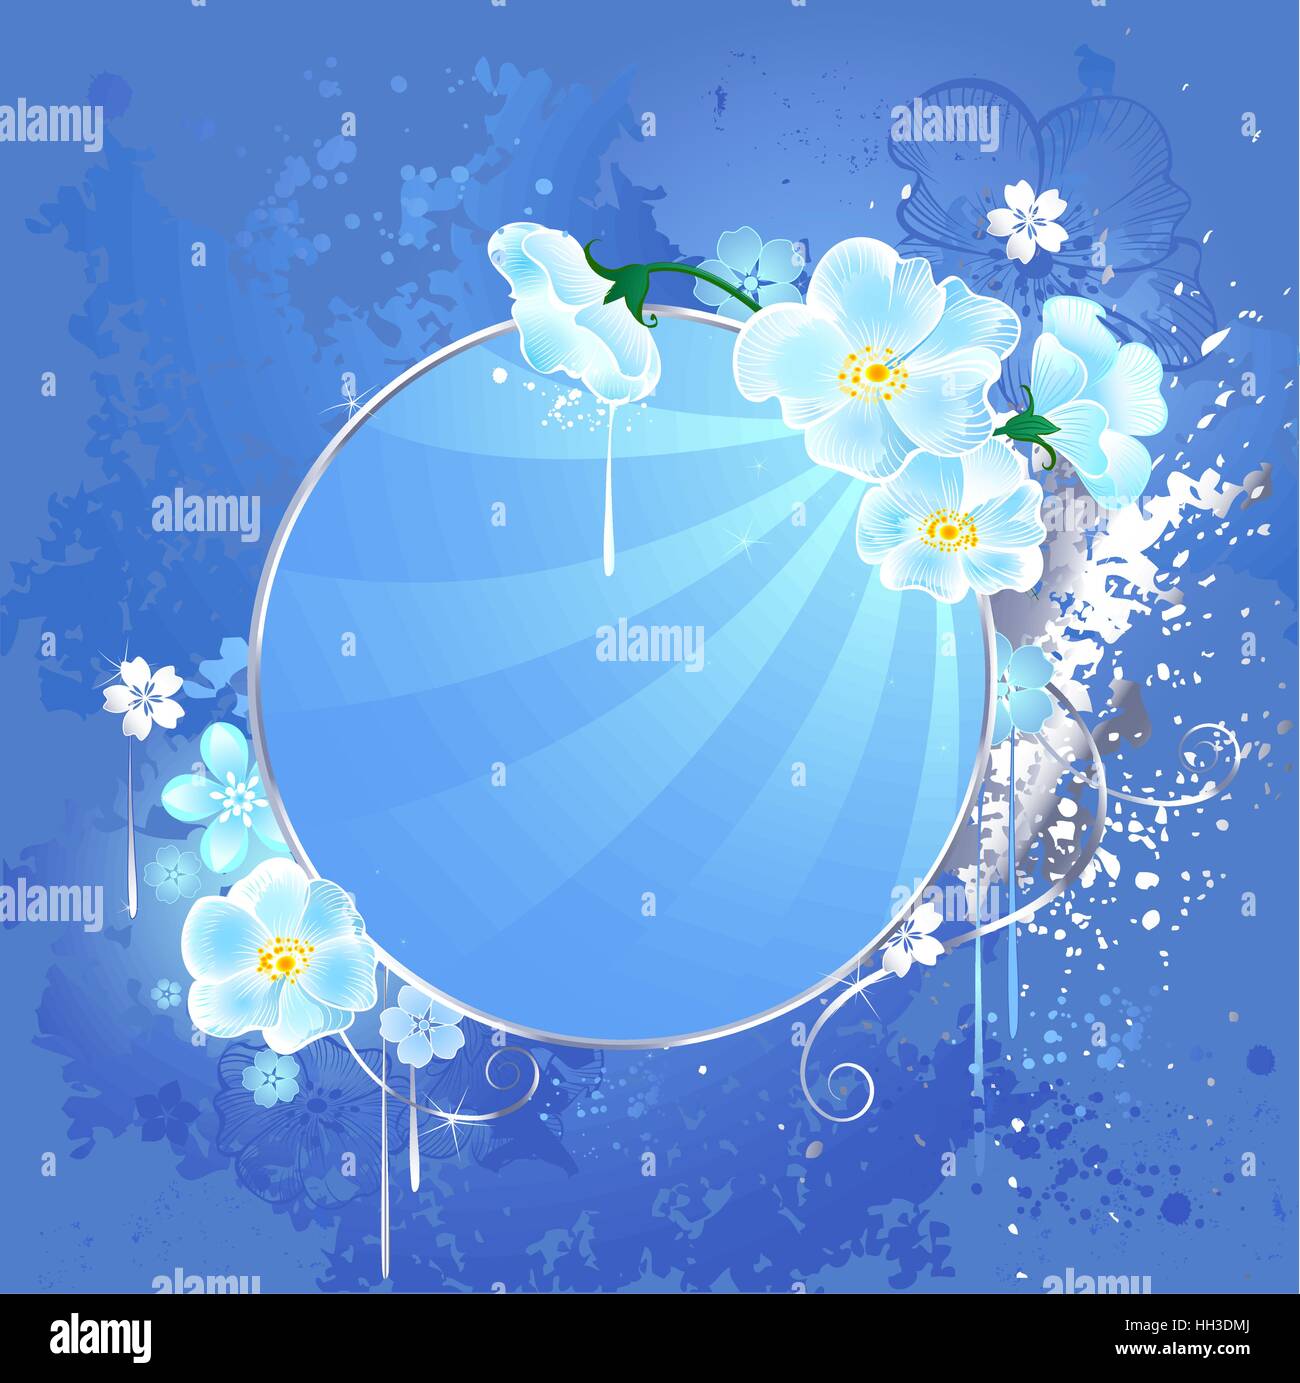 round, blue banner adorned with a silver frame and white flowers. Stock Vector